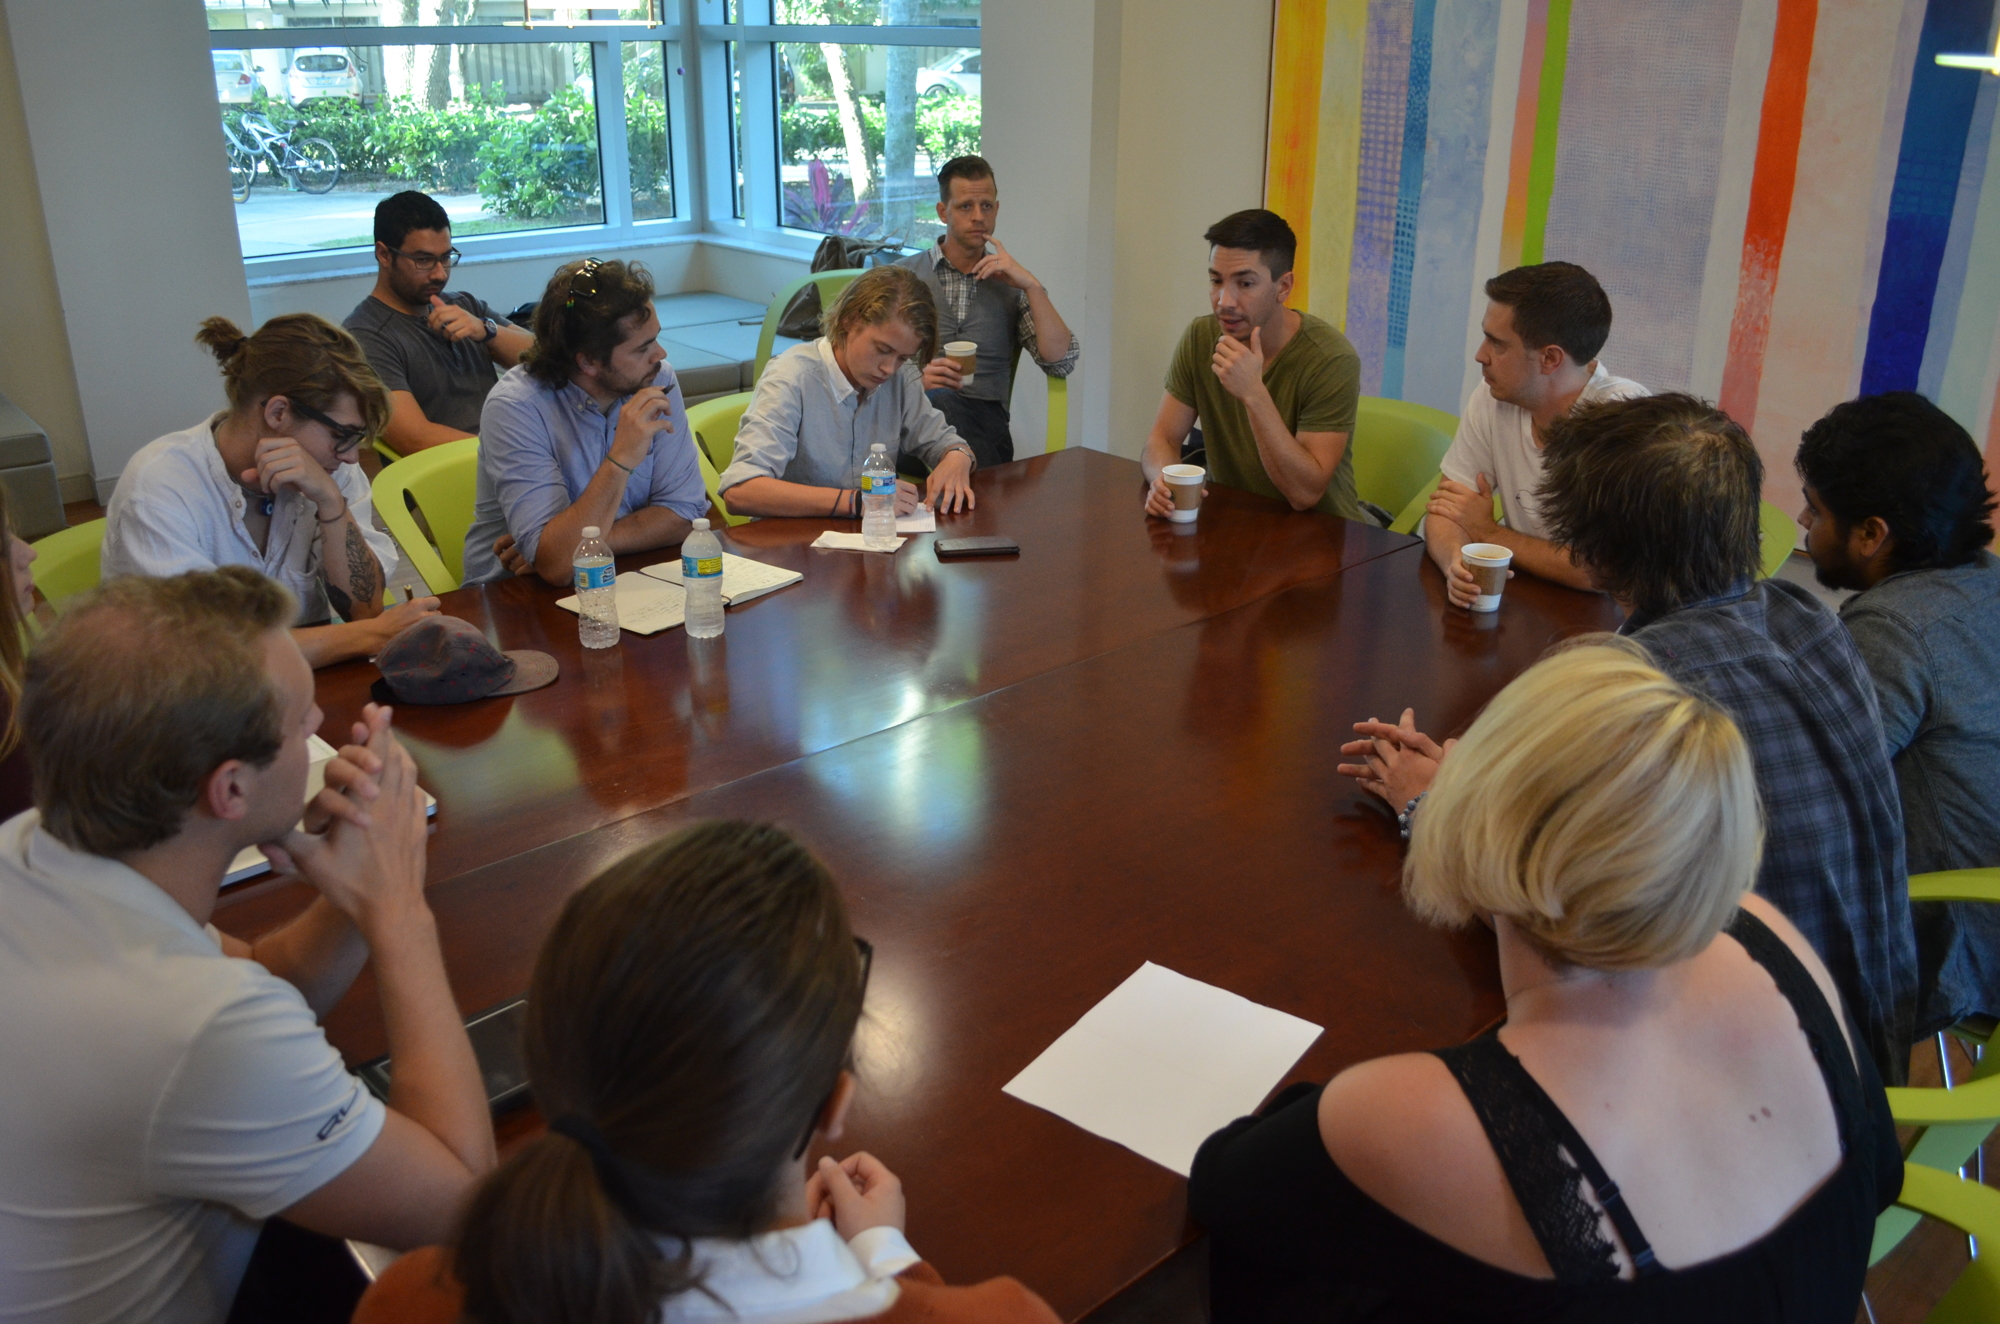 Justin and Christian Long (center) sit around with their team of Ringling College upperclassmen film students to discuss the initial phases of their travel/comedy web series set in Sarasota.